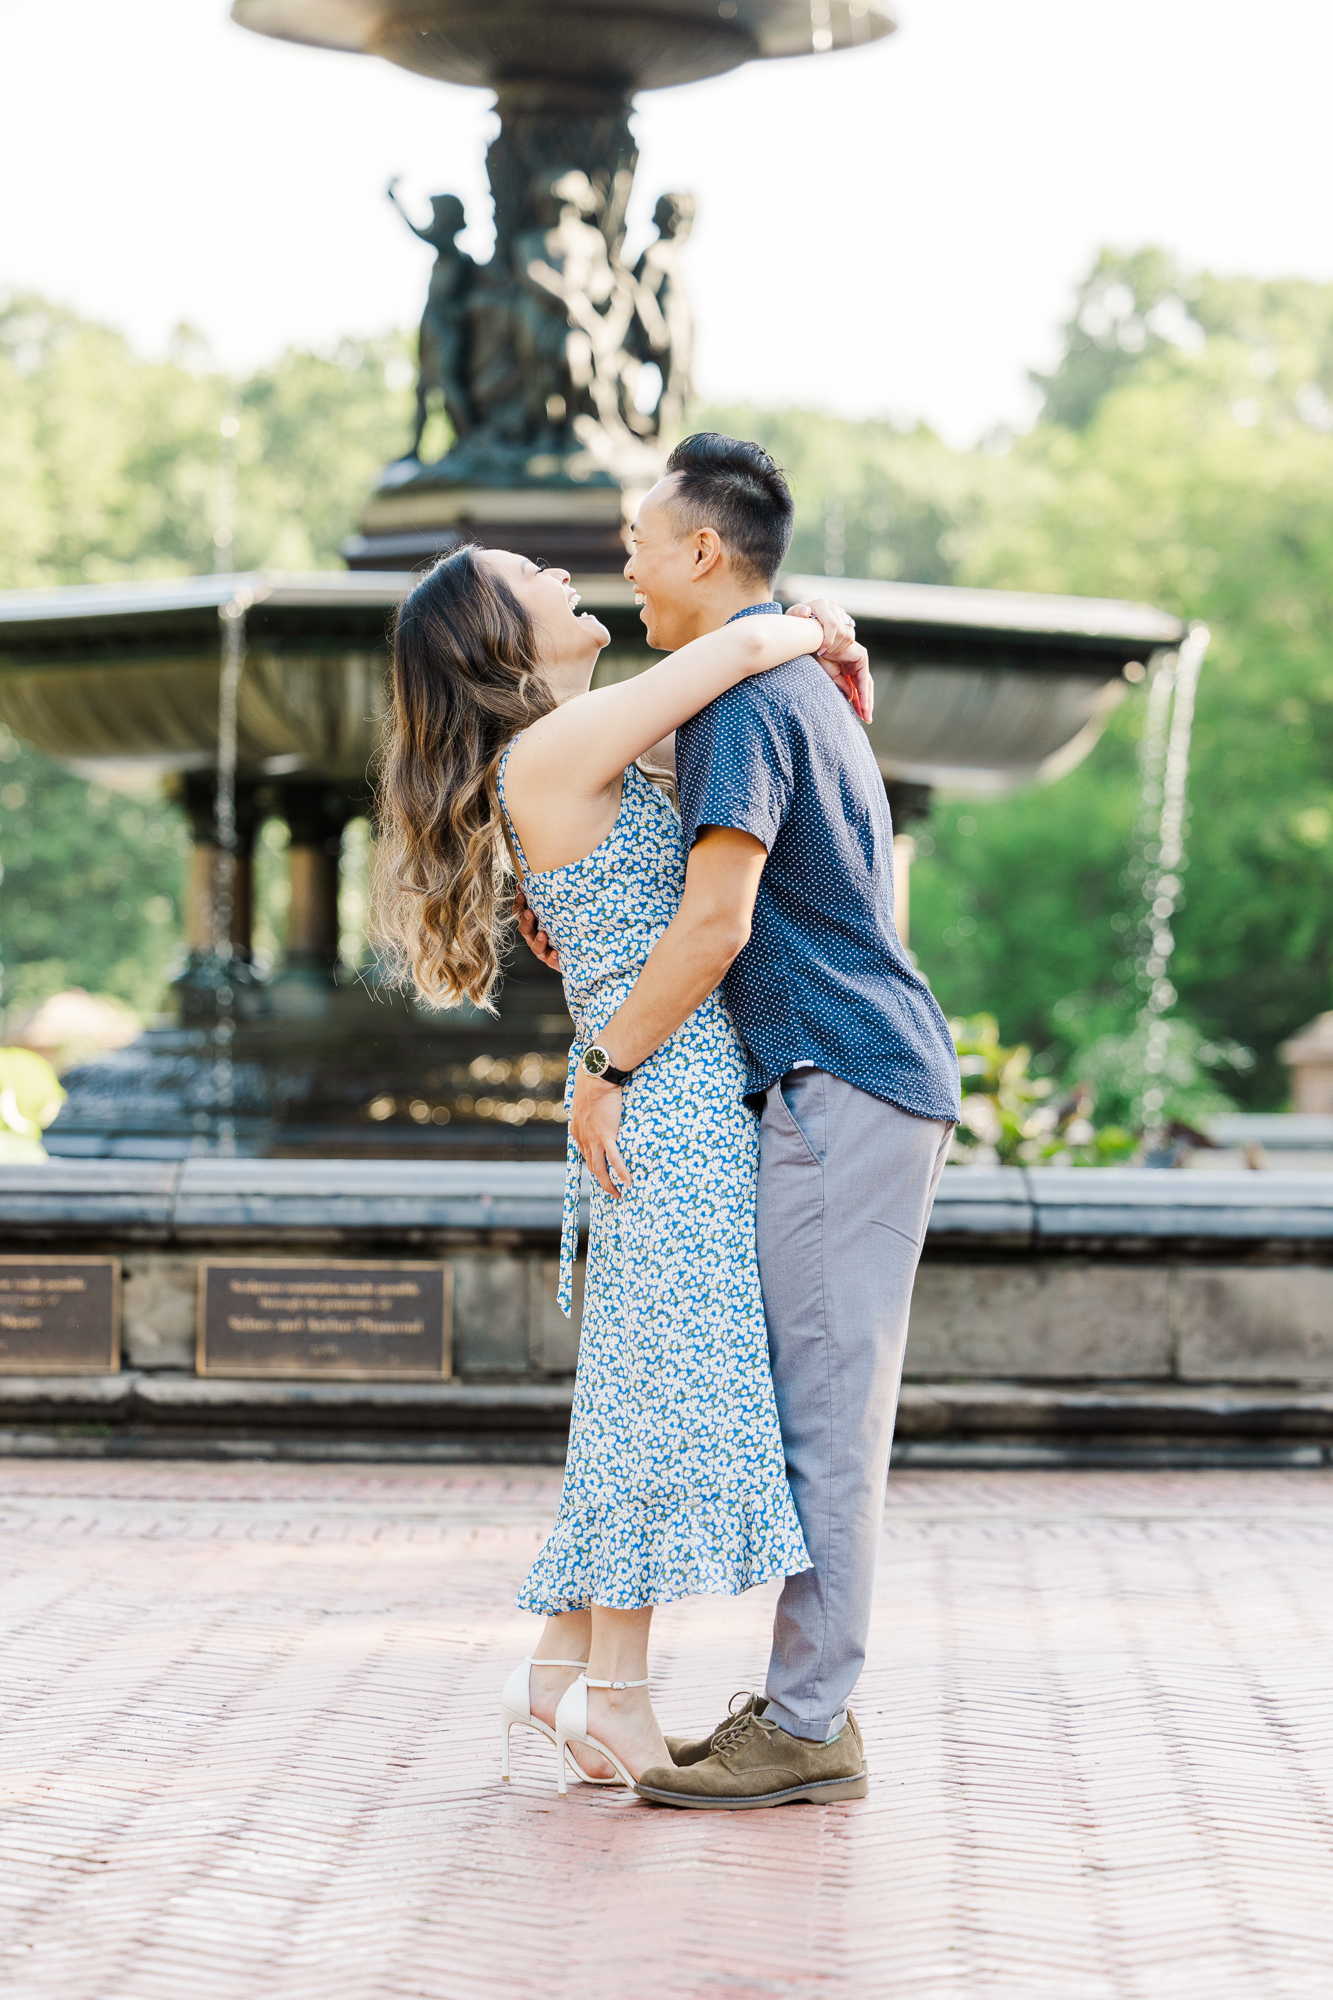 Romantic Engagement Photos in Central Park, New York